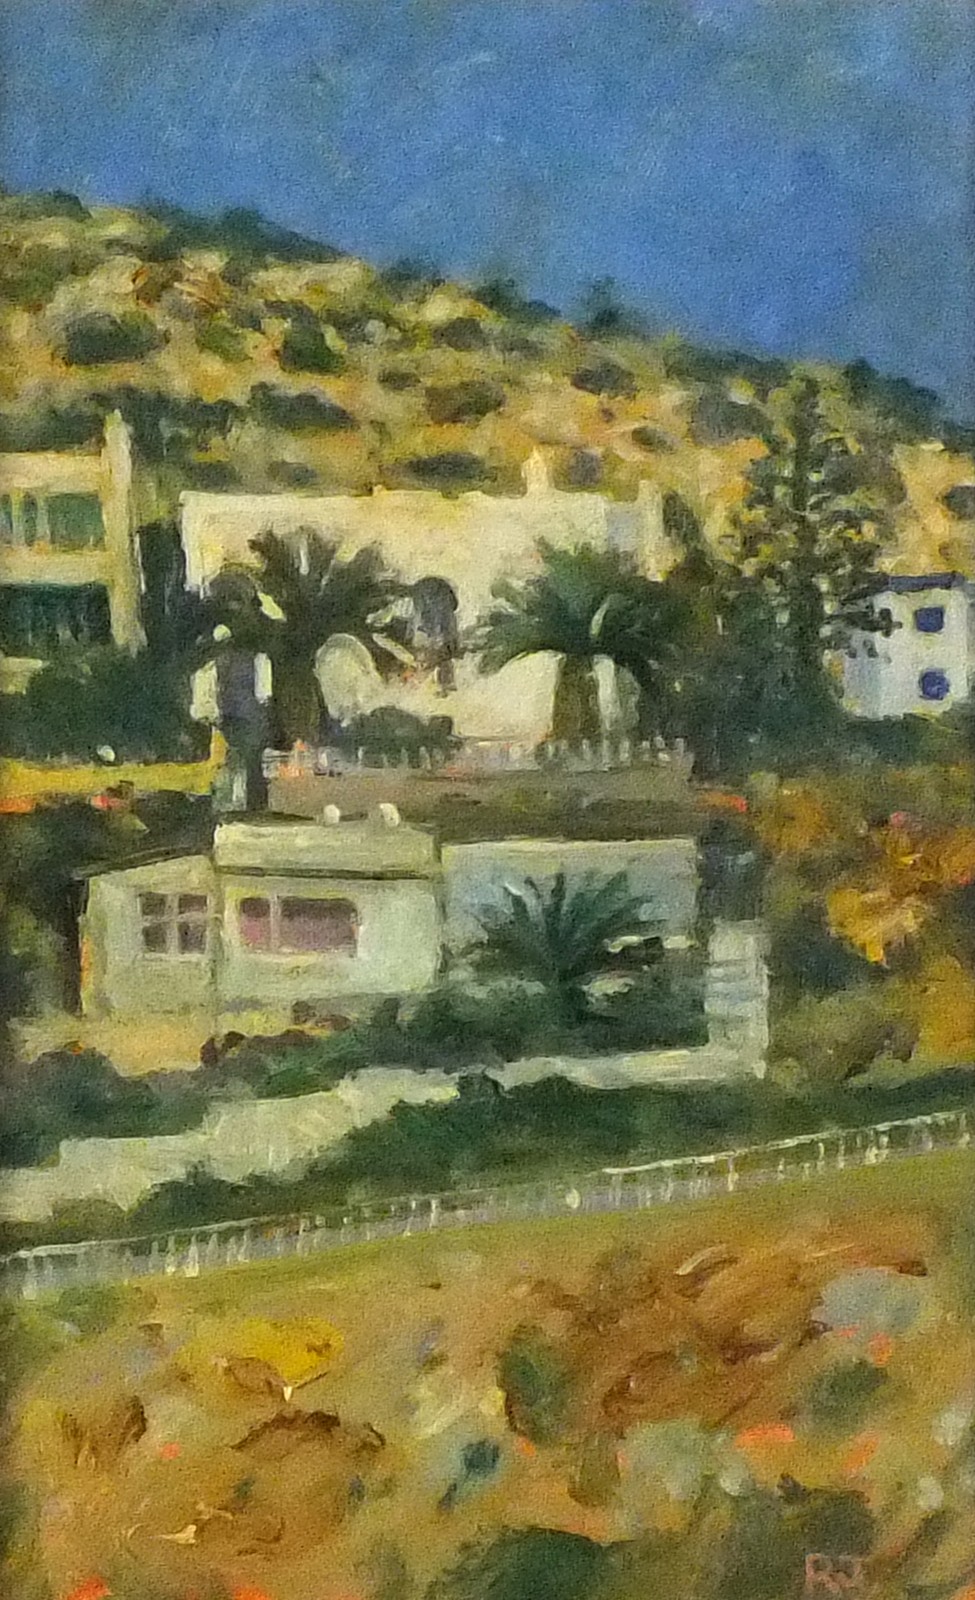 Robert JONES (British b. 1943) In the Aegean, Houses and Palms, Agathonision, Oil on canvas board,